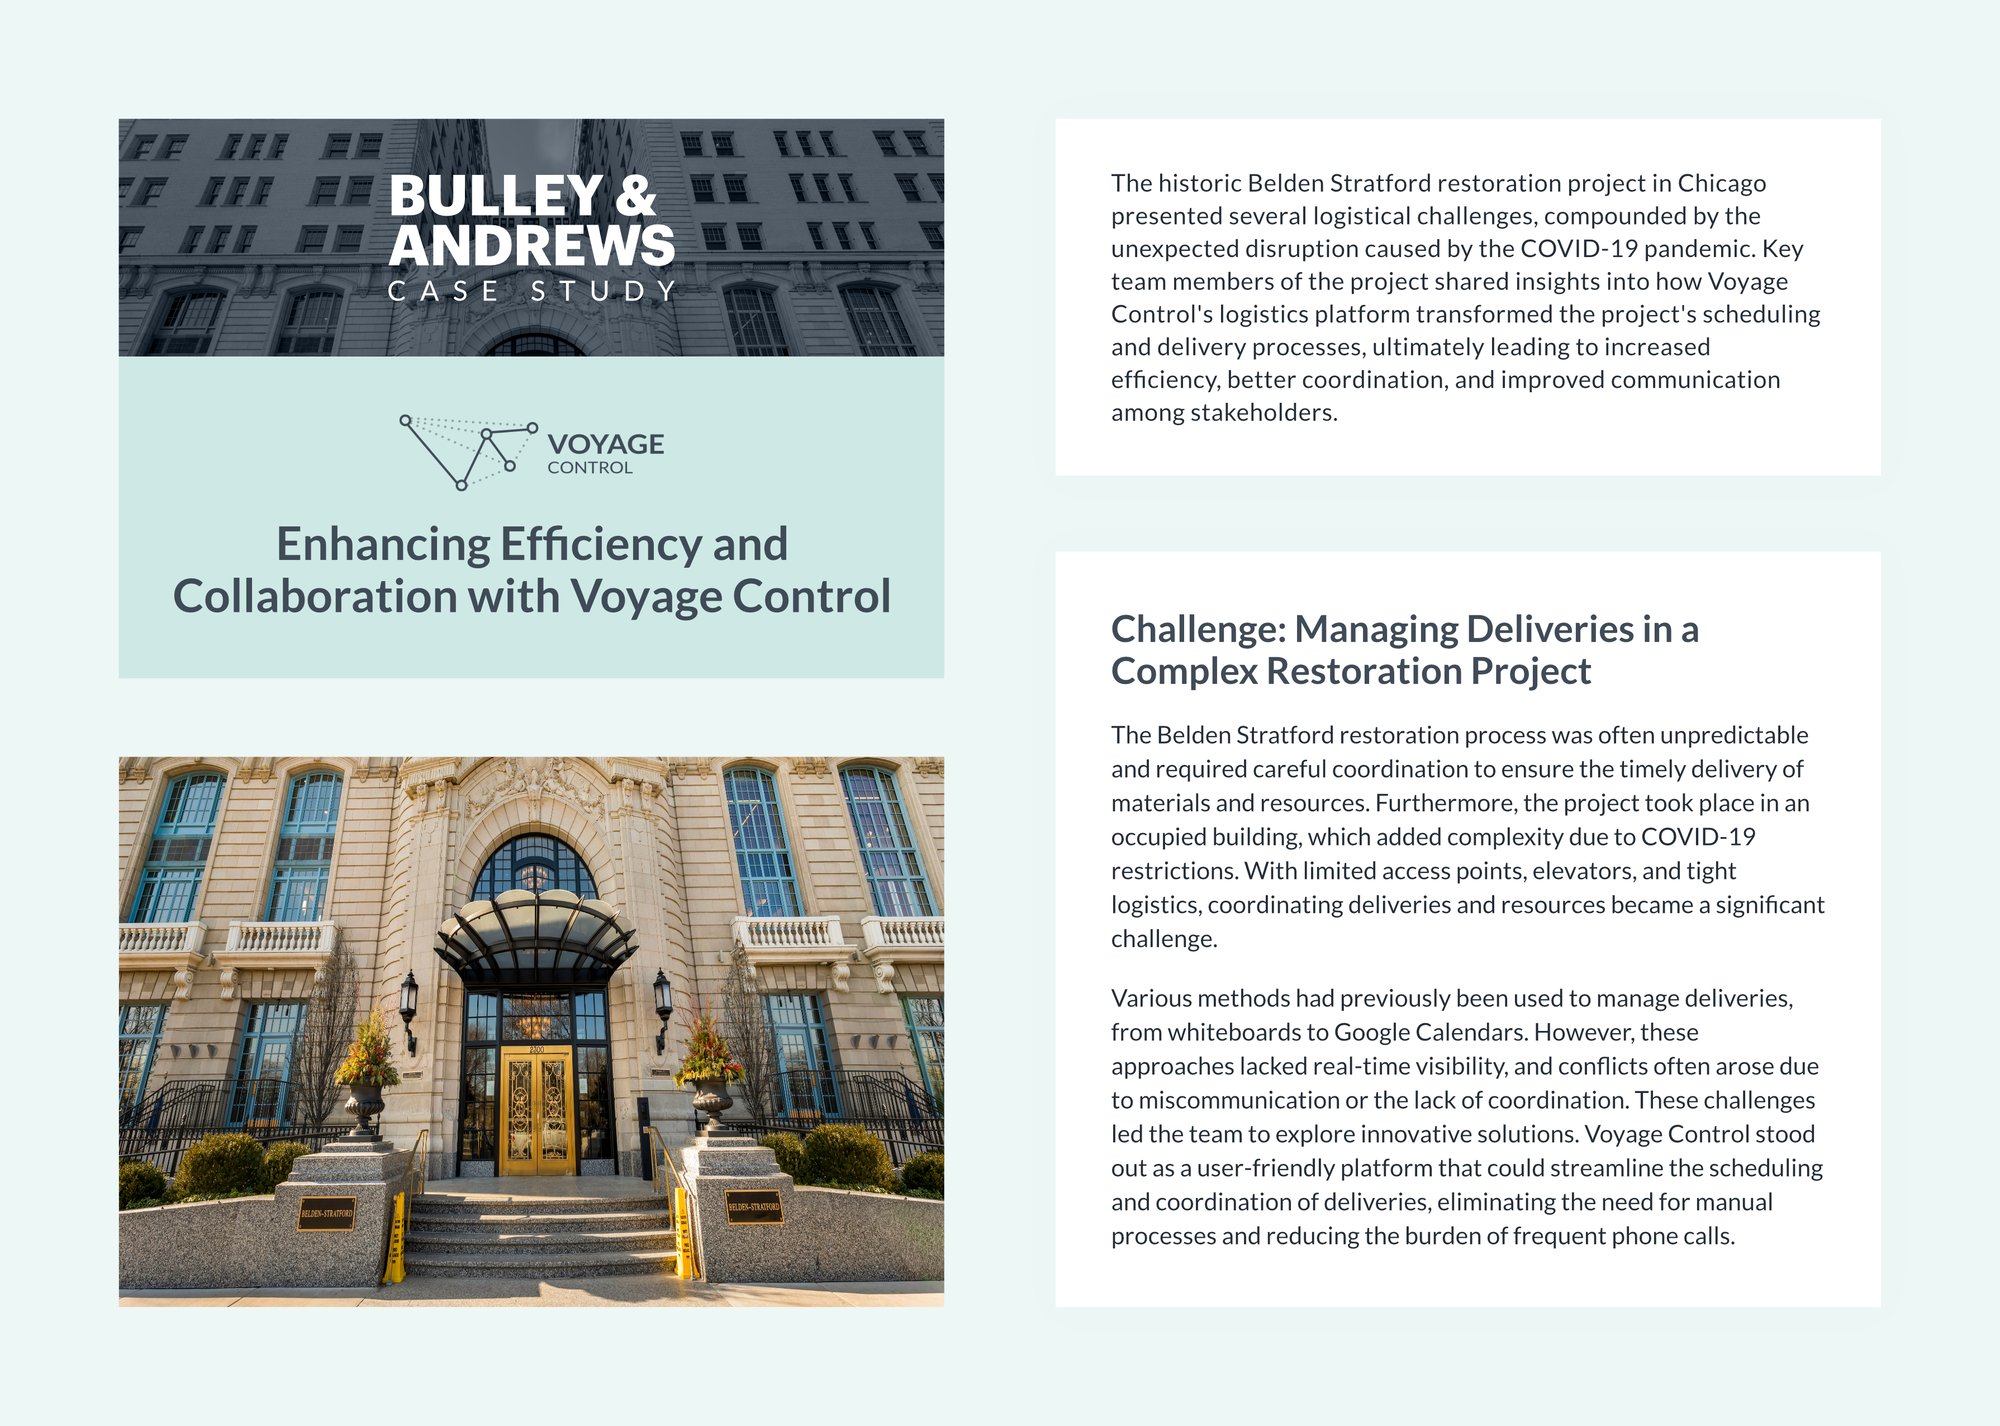 Bulley & Andrews case study: enhancing efficiency and collaboration with Voyage Control